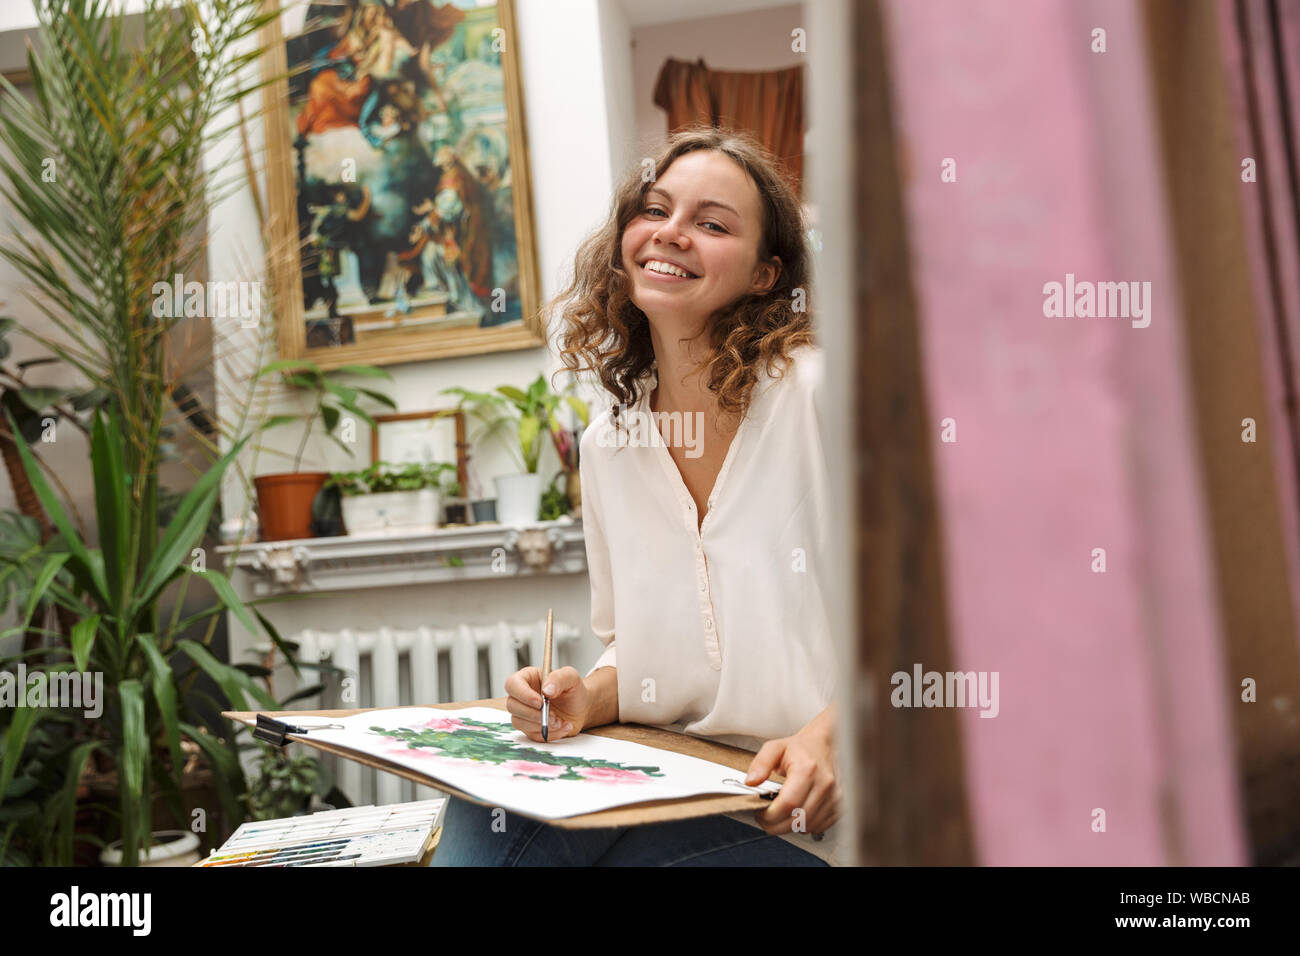 Portrait of affable artistic woman sitting on chair while drawing picture on paper with pain brush and acrylic colors in workshop or master class Stock Photo